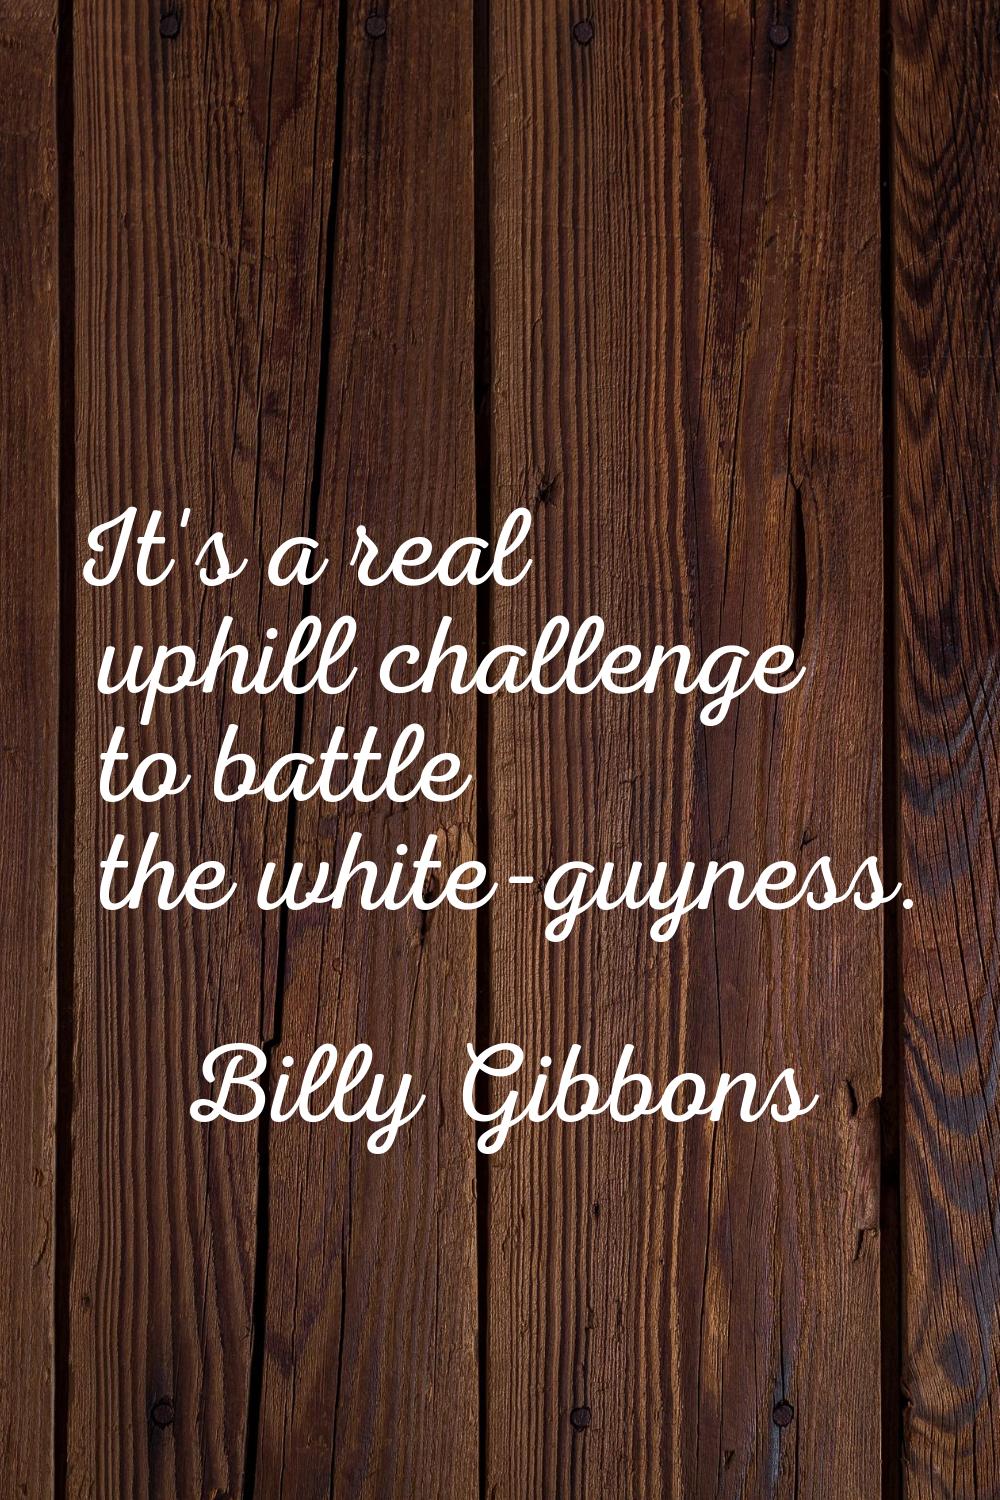 It's a real uphill challenge to battle the white-guyness.